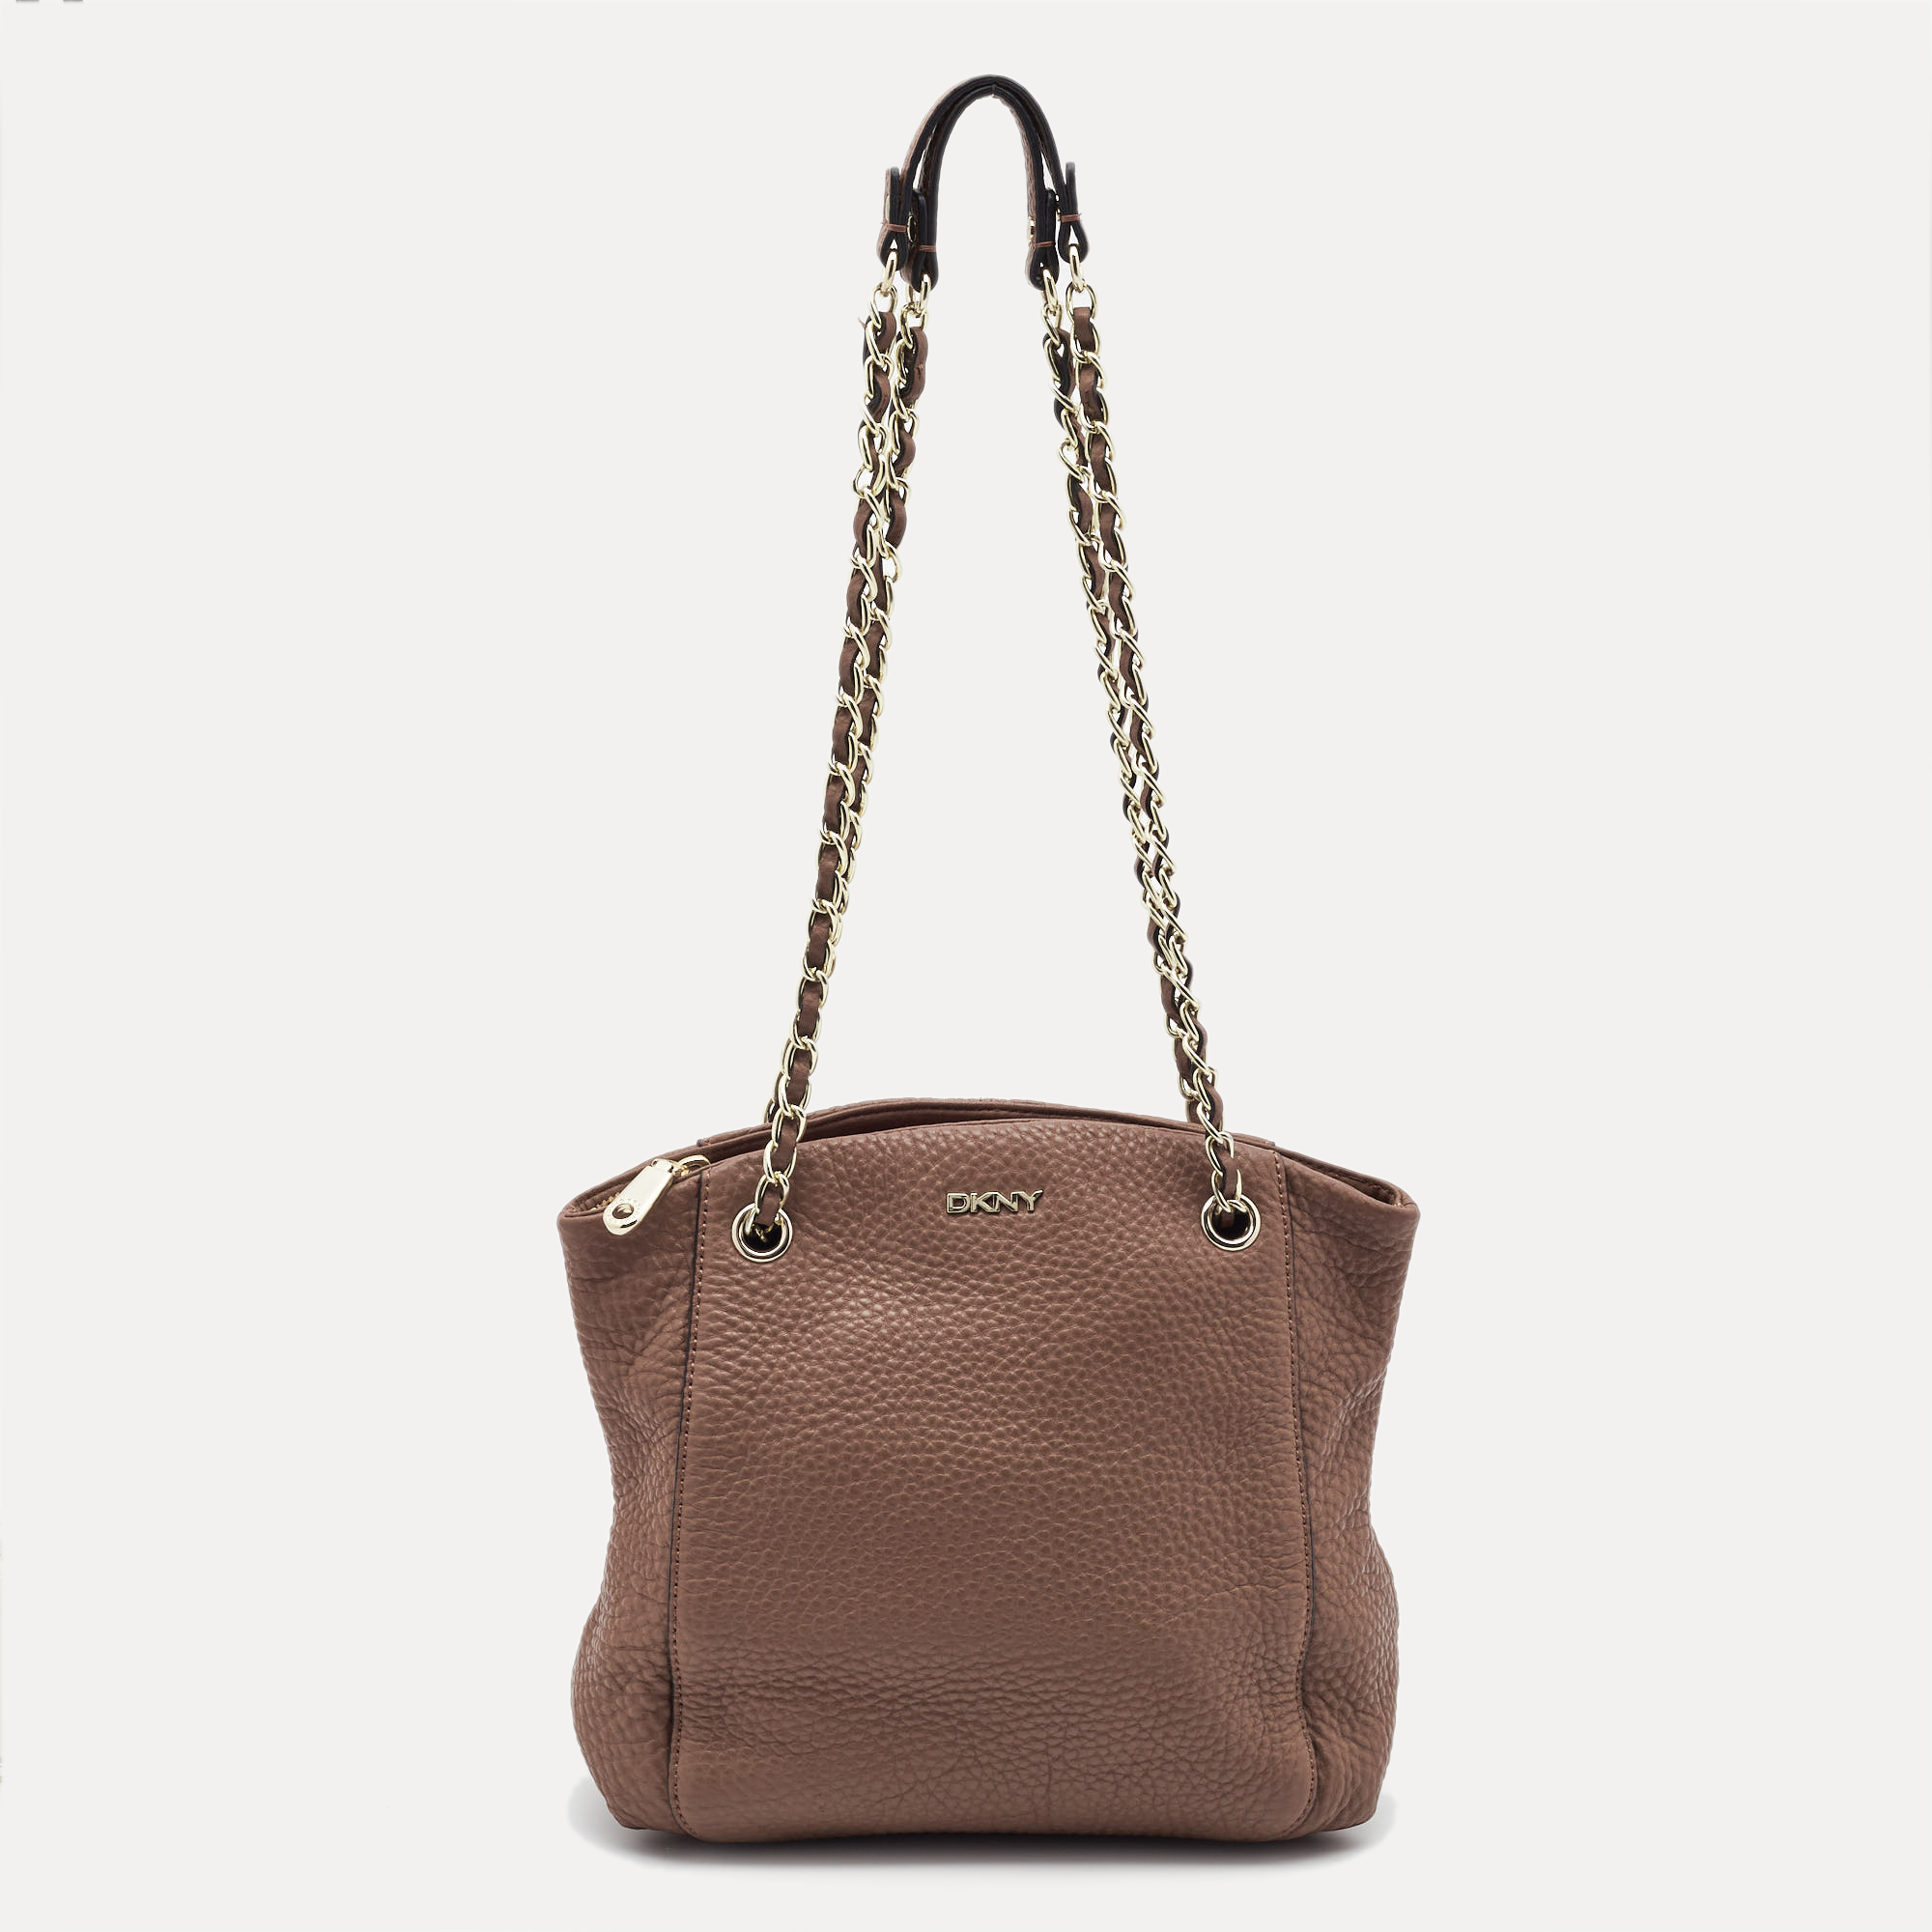 

DKNY Brown Pebbled Leather Chain Tote